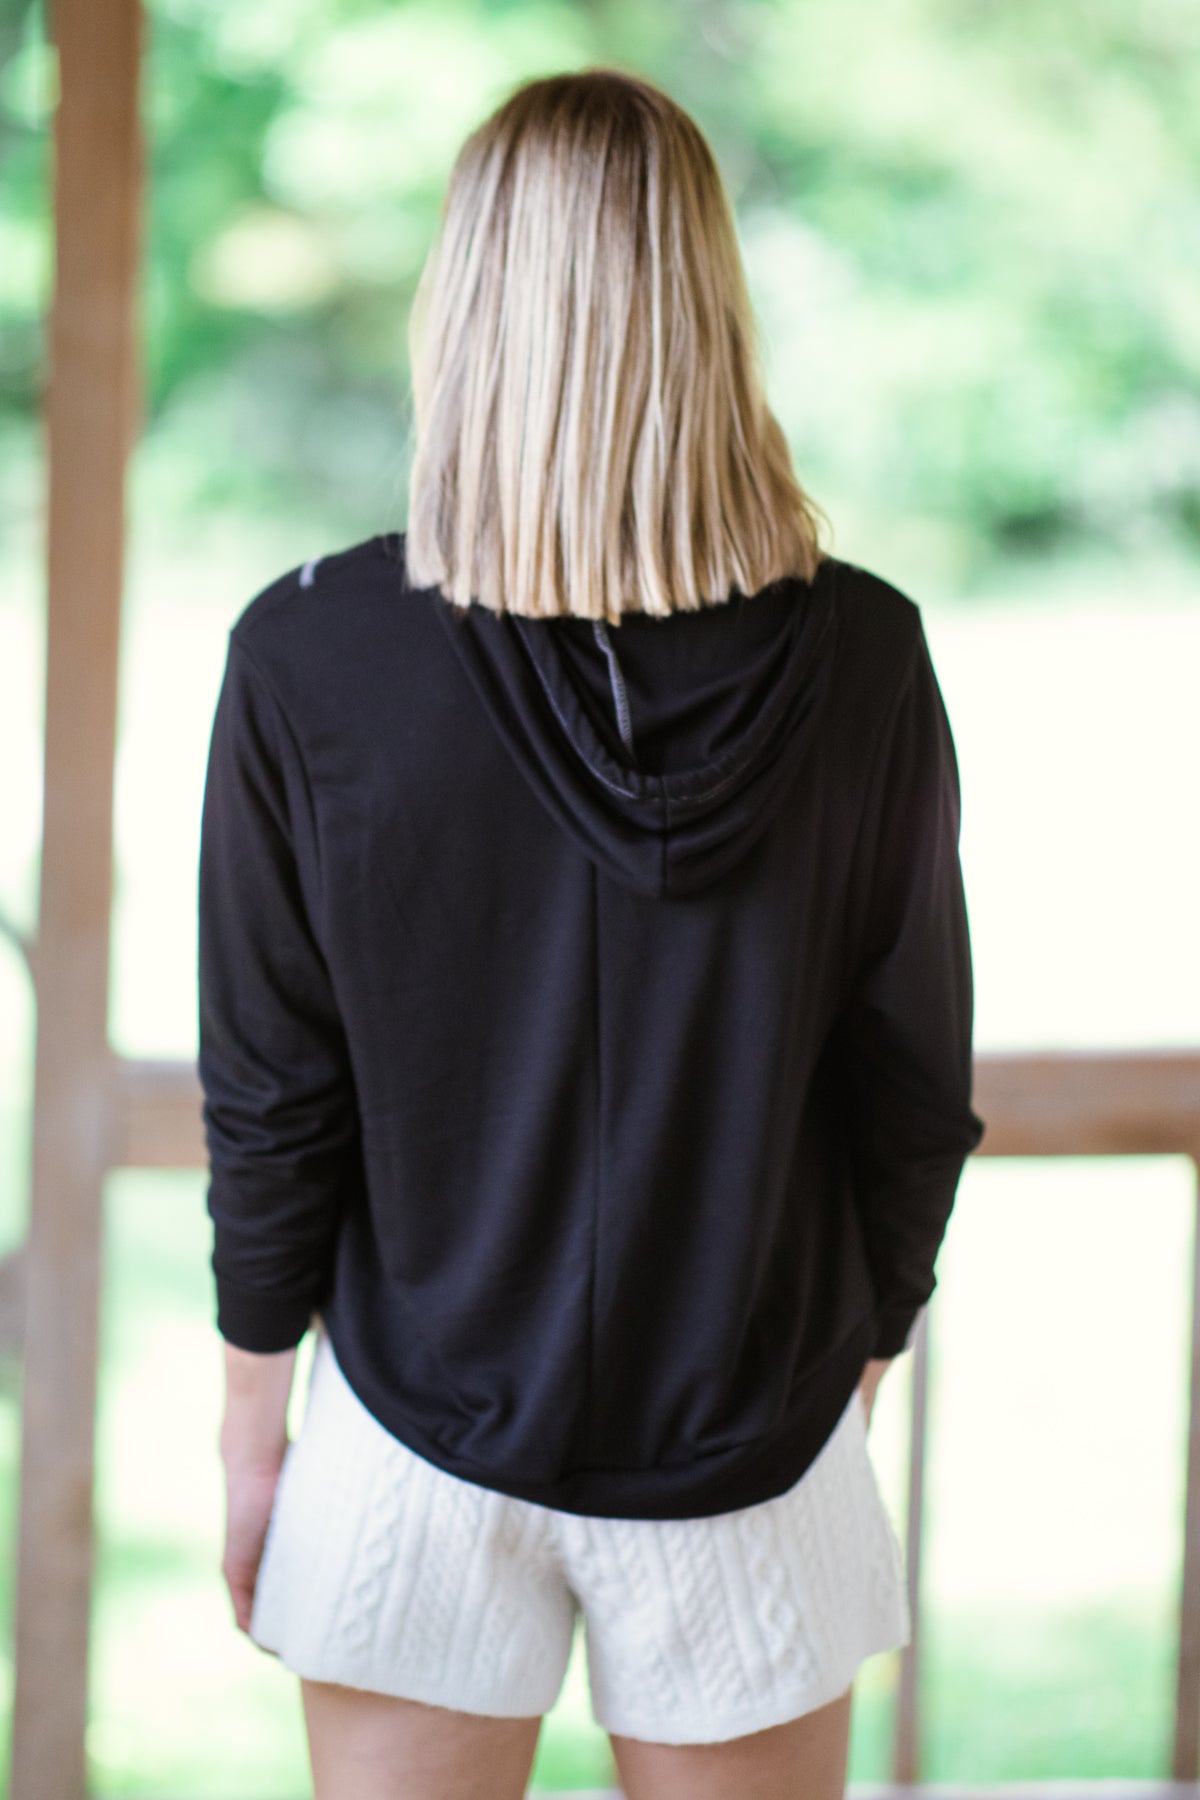 Black and White Contrast Stitch Hooded Top - Filly Flair